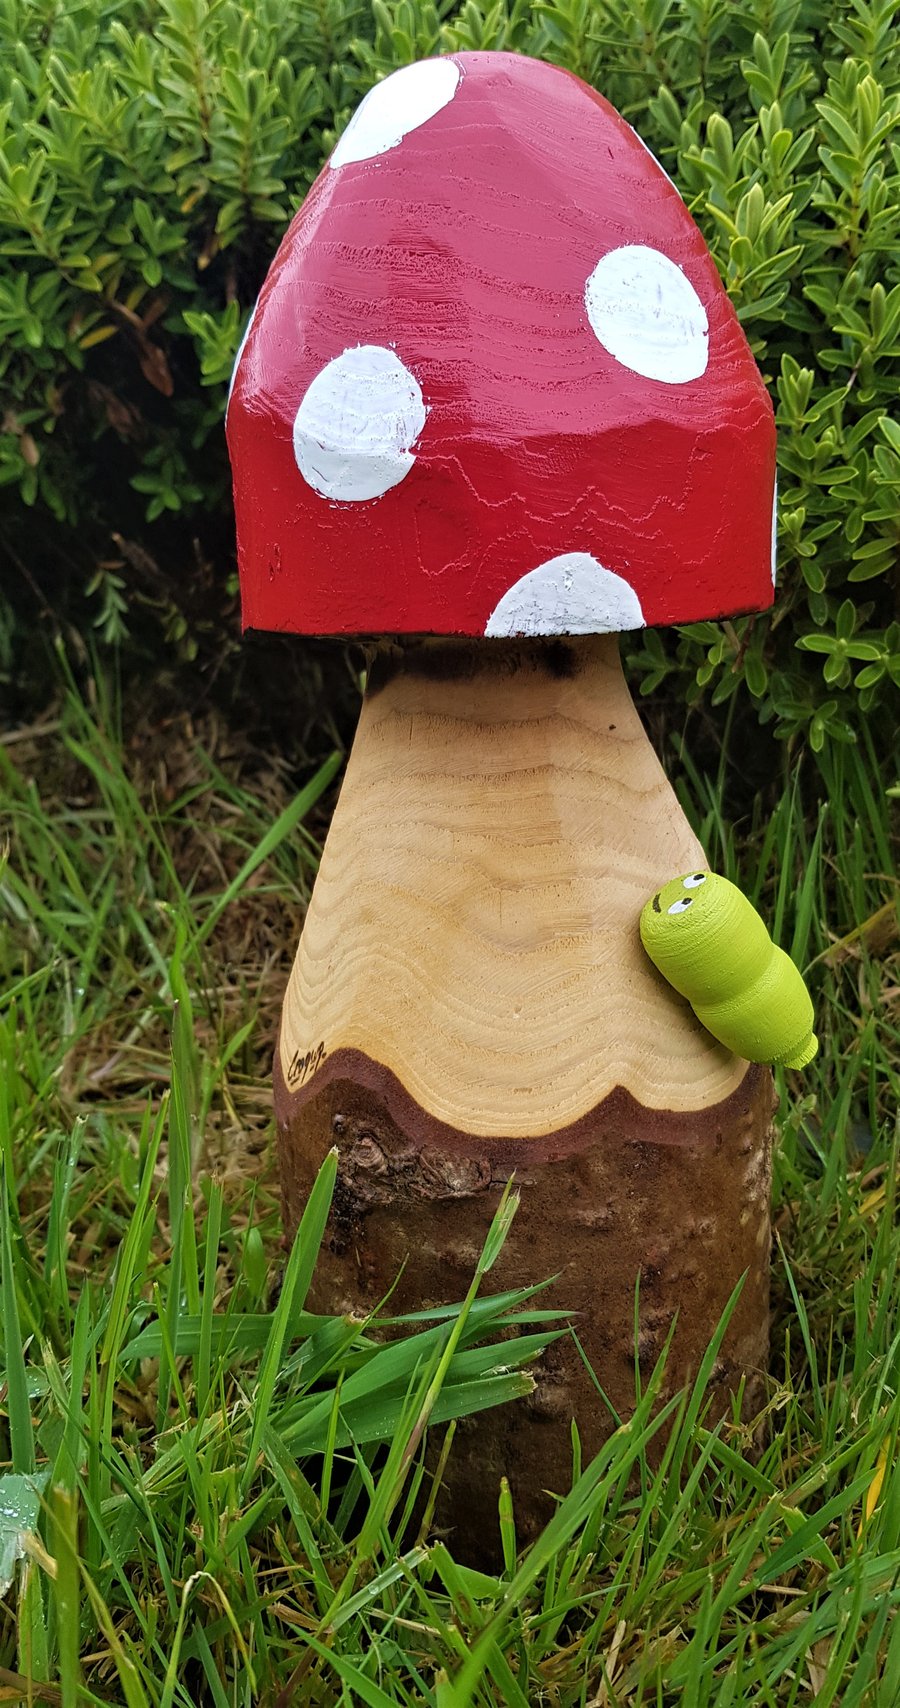 Spotty Toadstool with Caterpillar